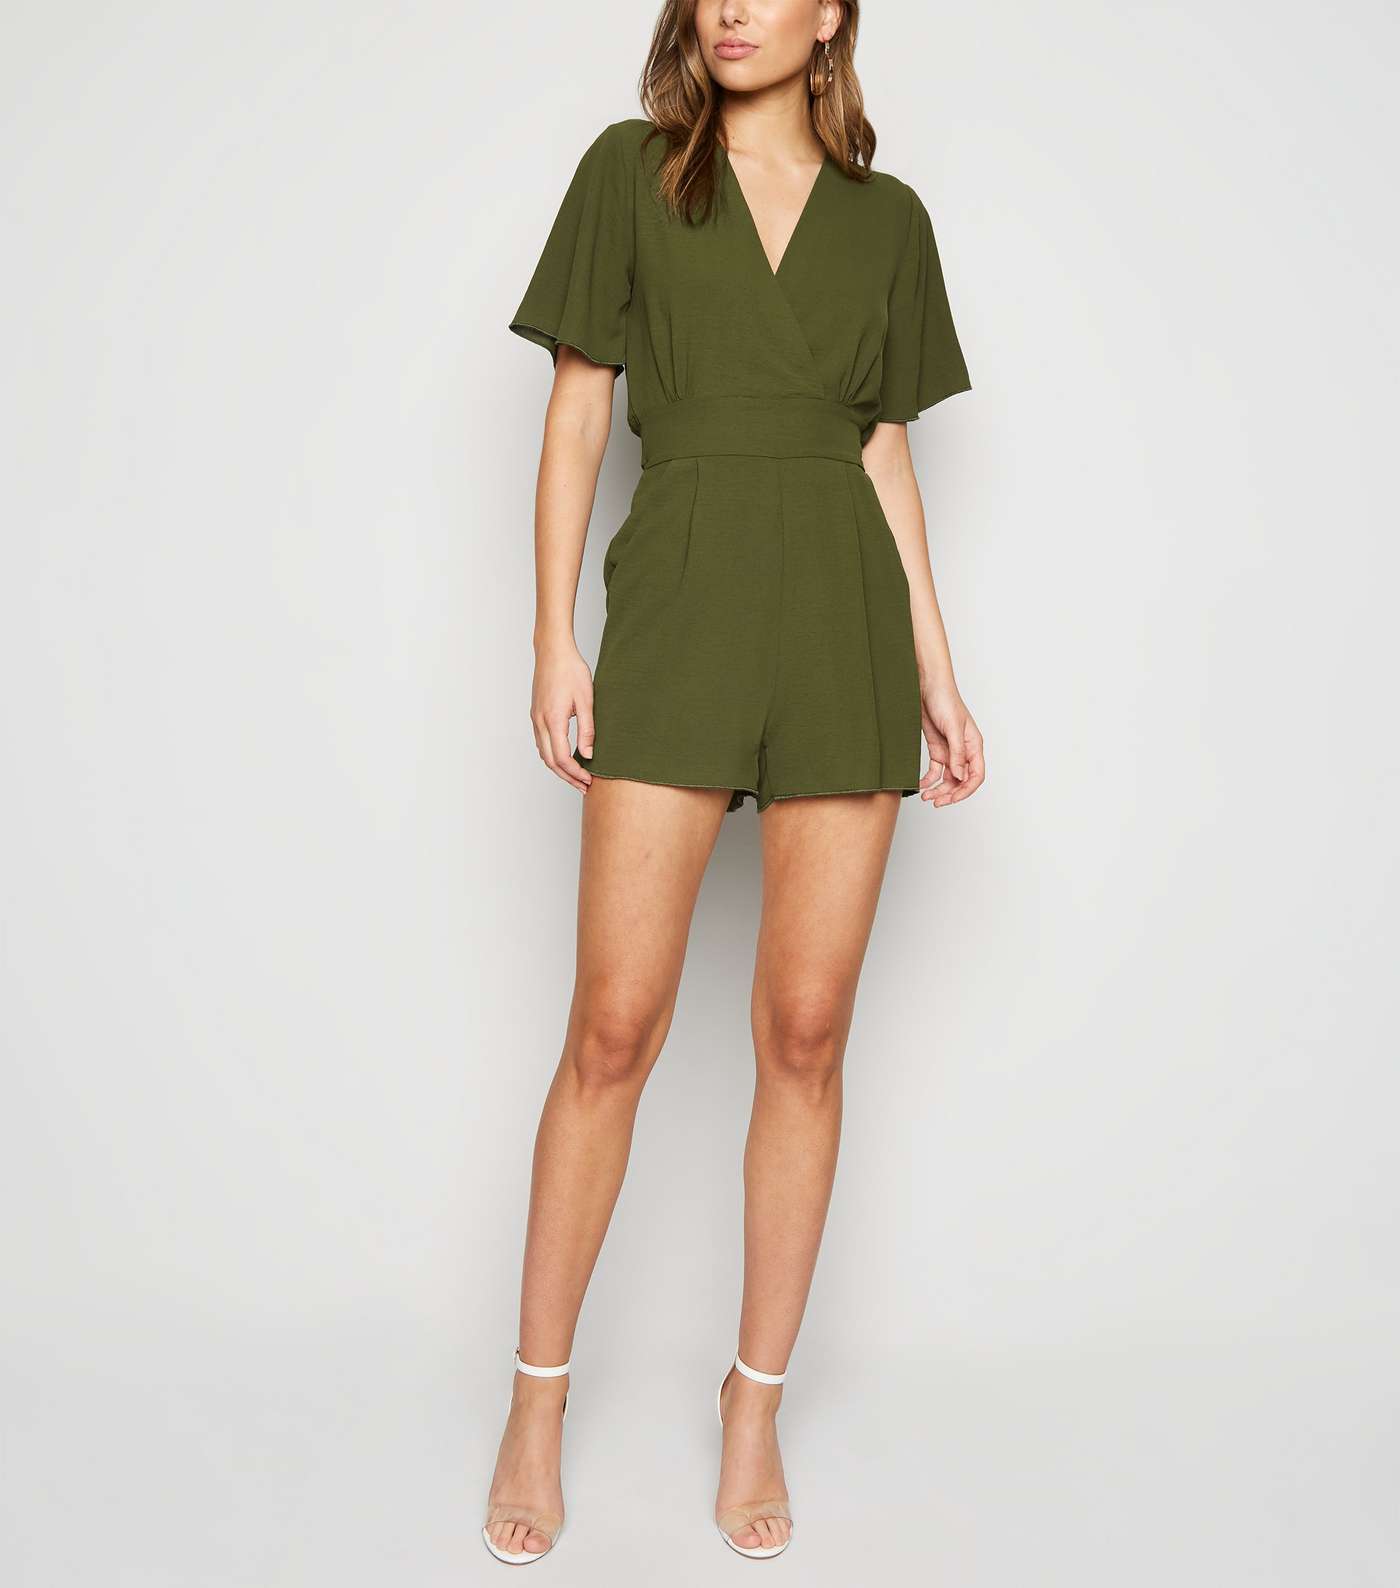 Cameo Rose Olive Wrap Playsuit Image 2